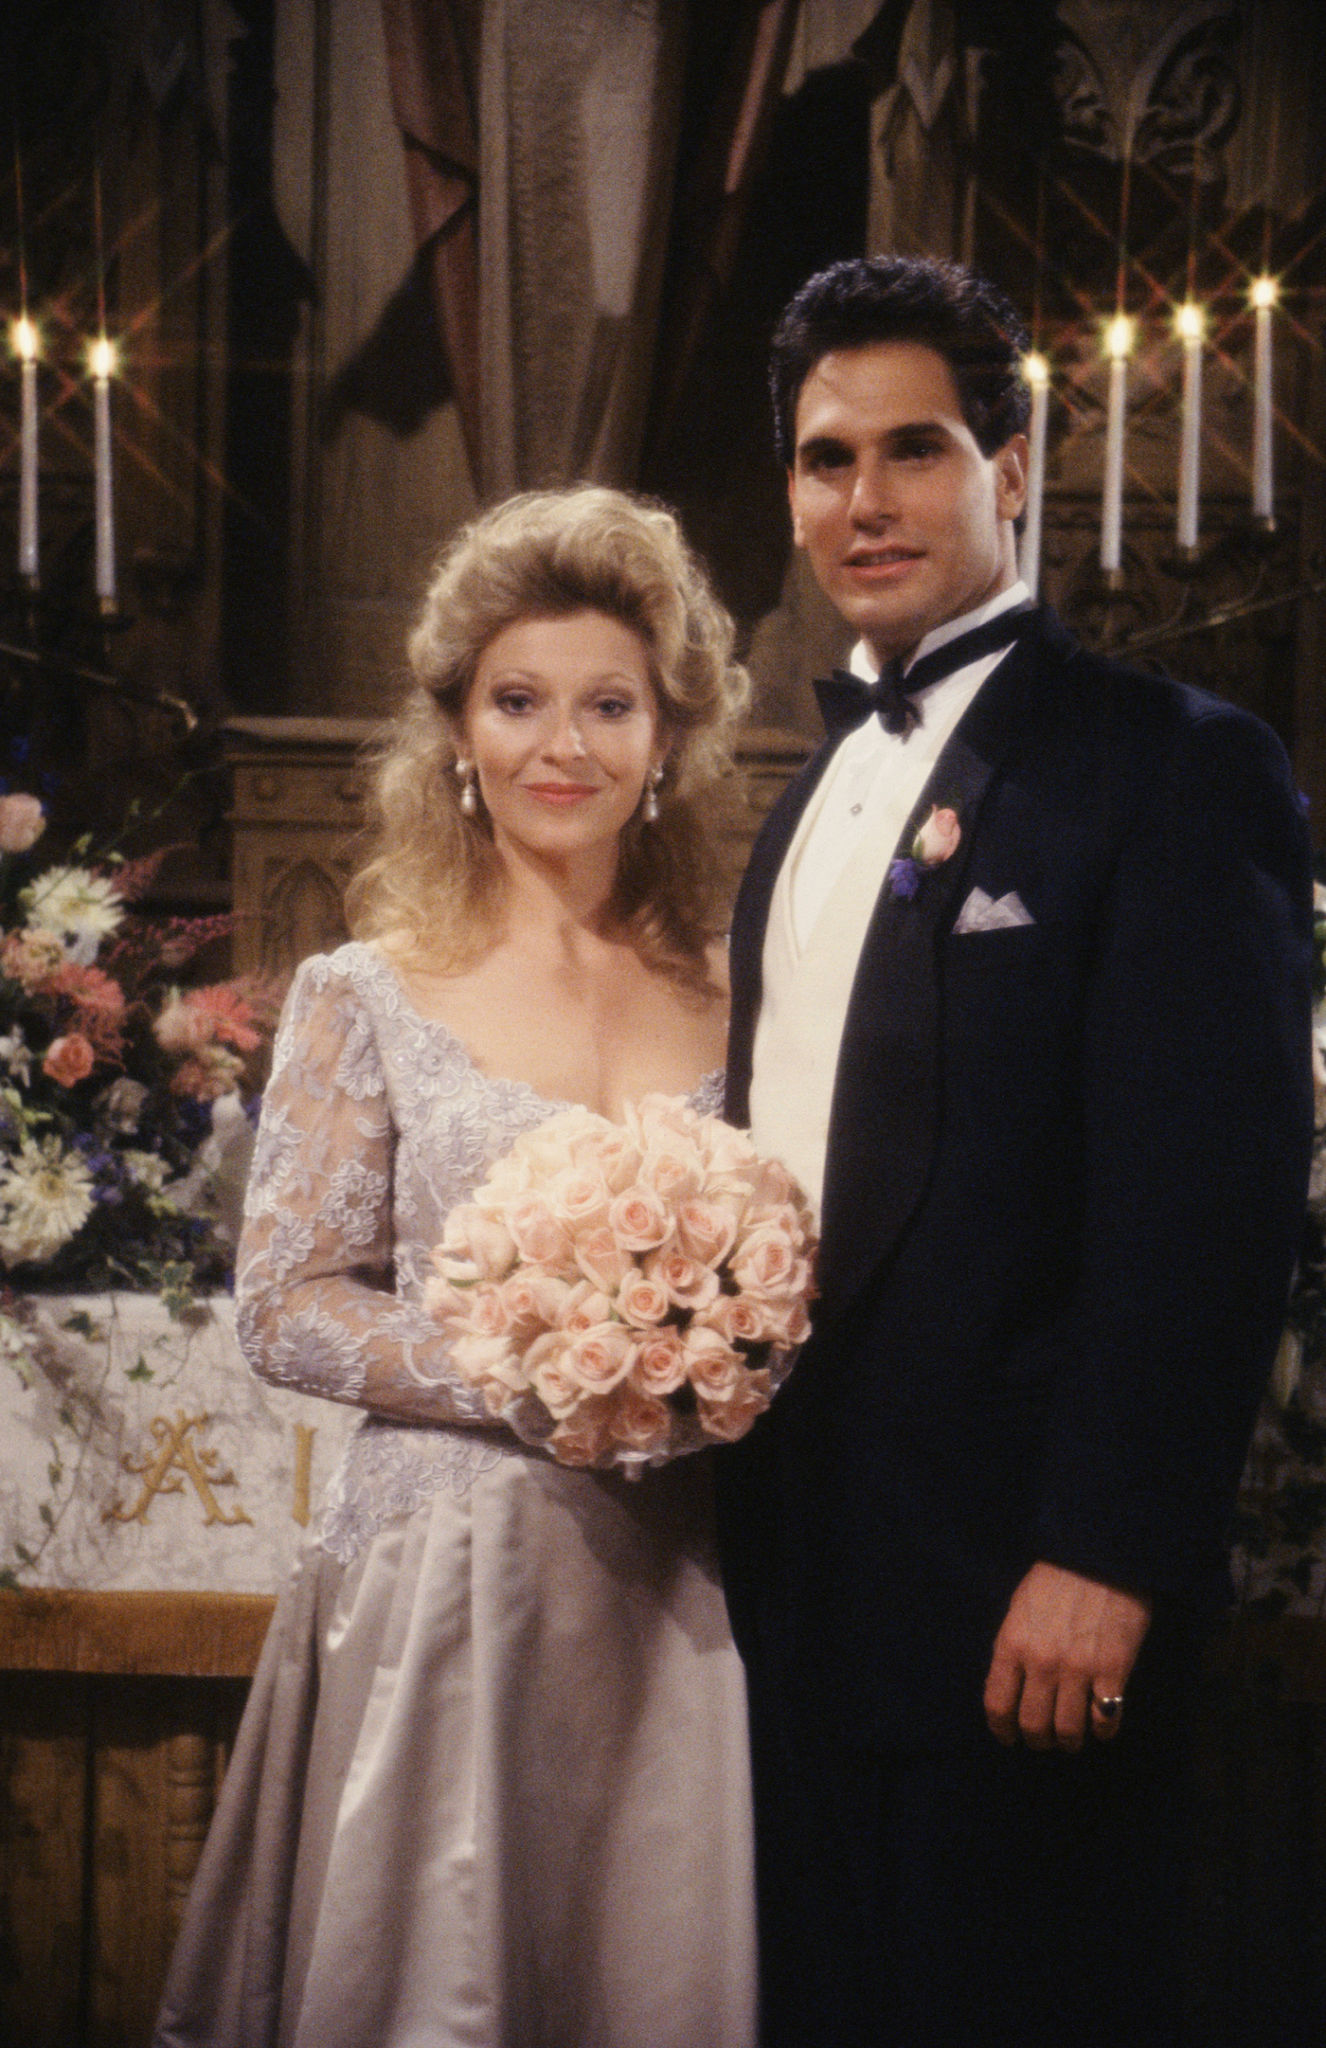 Y&R's Beth Maitland and Don Diamont